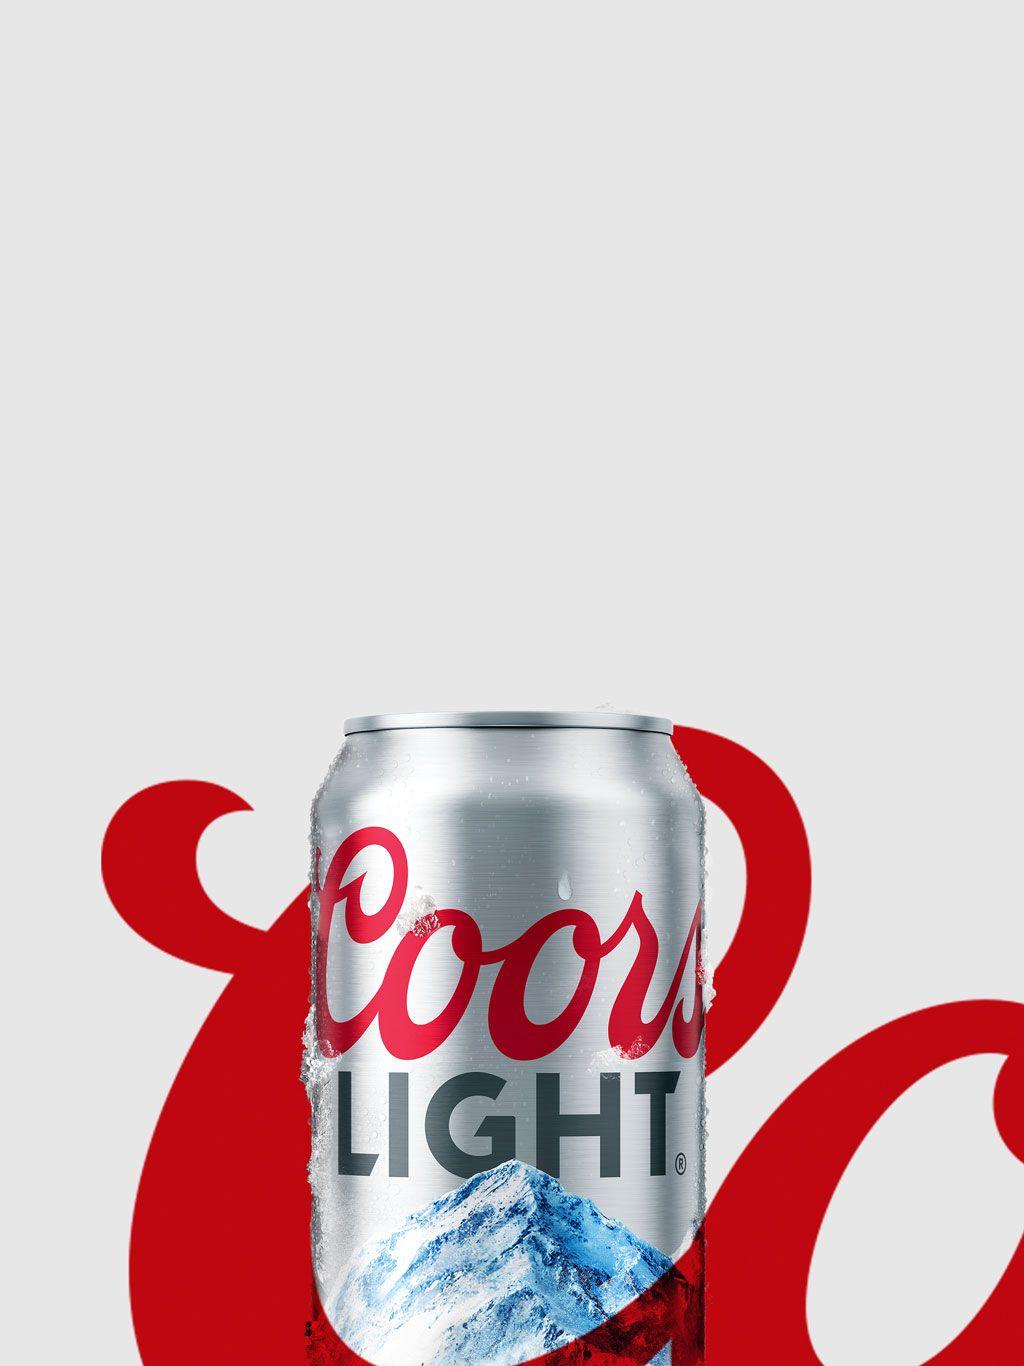 Coors Light Can Logo - Light Beer Born In The Rockies 1978